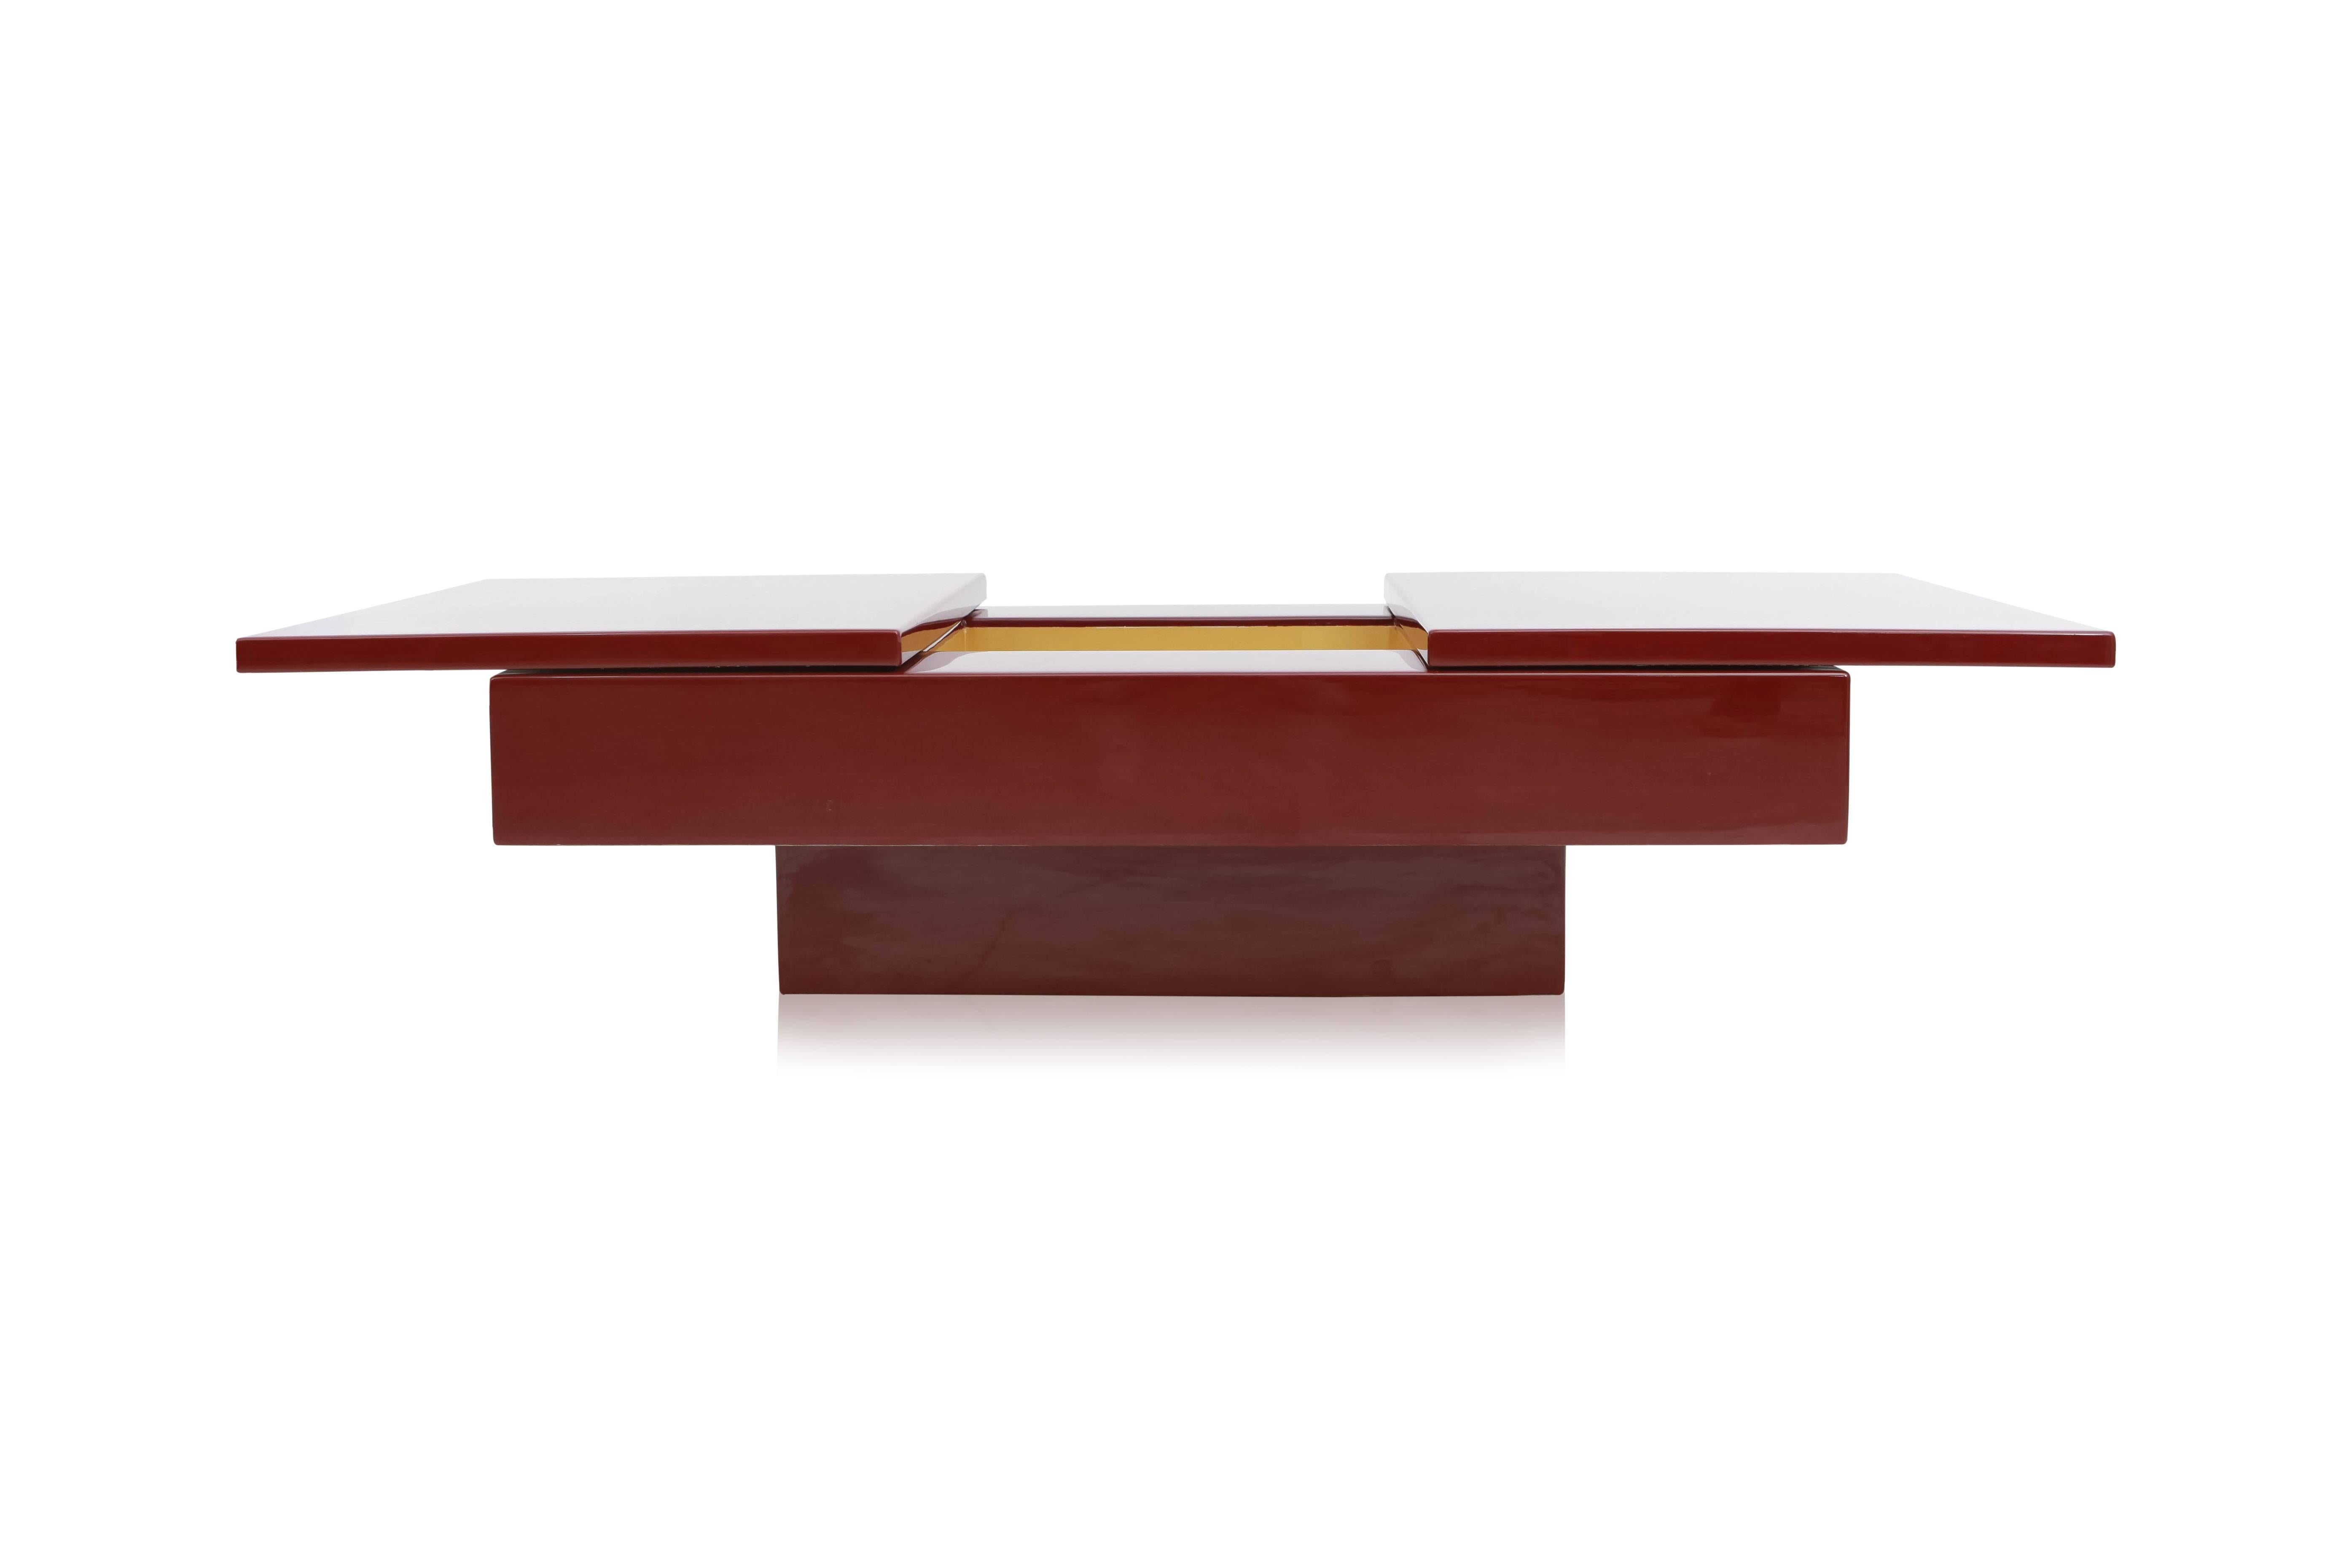 Jean Claude Mahey sliding bar coffee table.
France, 1980s.
Burgundy red lacquer, brass inside.
Hollywood Regency glam.

Closed: L 130 cm W 80 cm H 40 cm
Opened: L 180 cm.